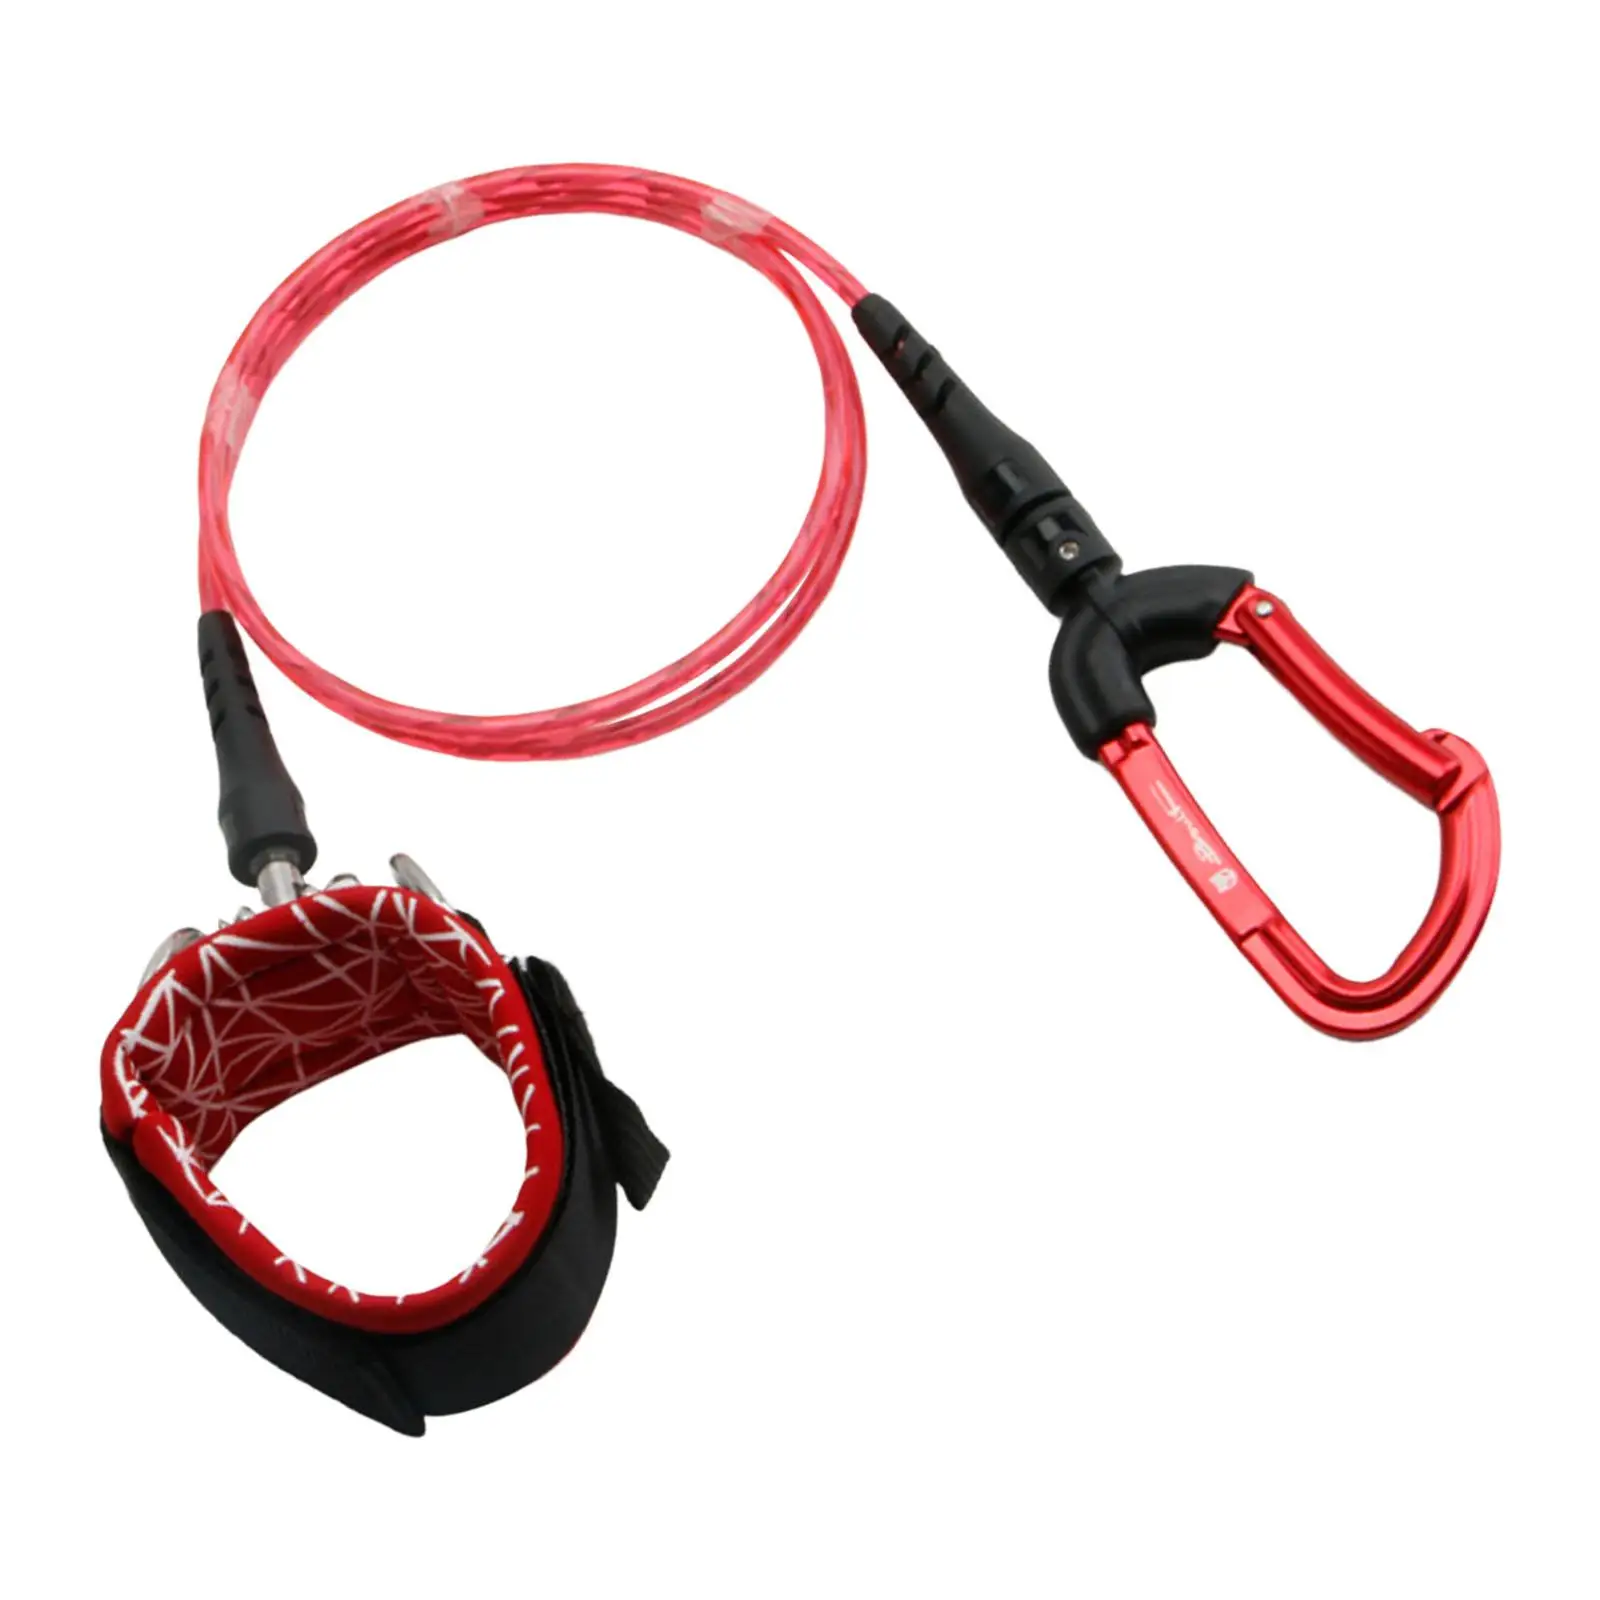 Freediving Lanyard Professional Adjustable Rope for Diving